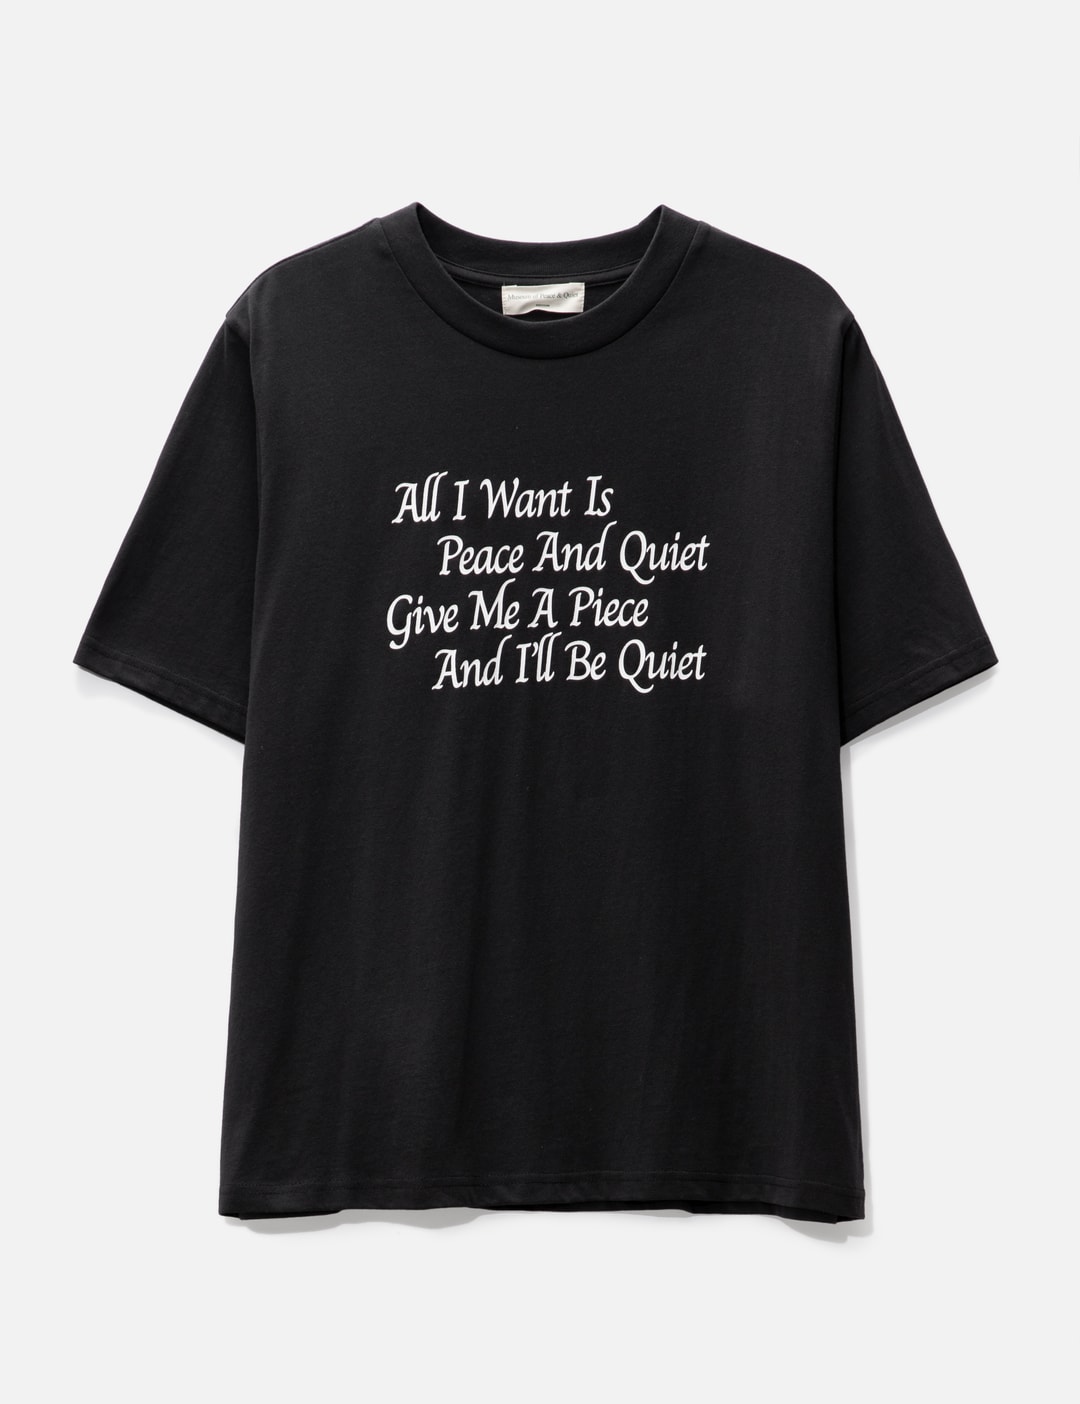 Museum of Peace & Quiet - Haiku T-shirt | HBX - Globally Curated ...